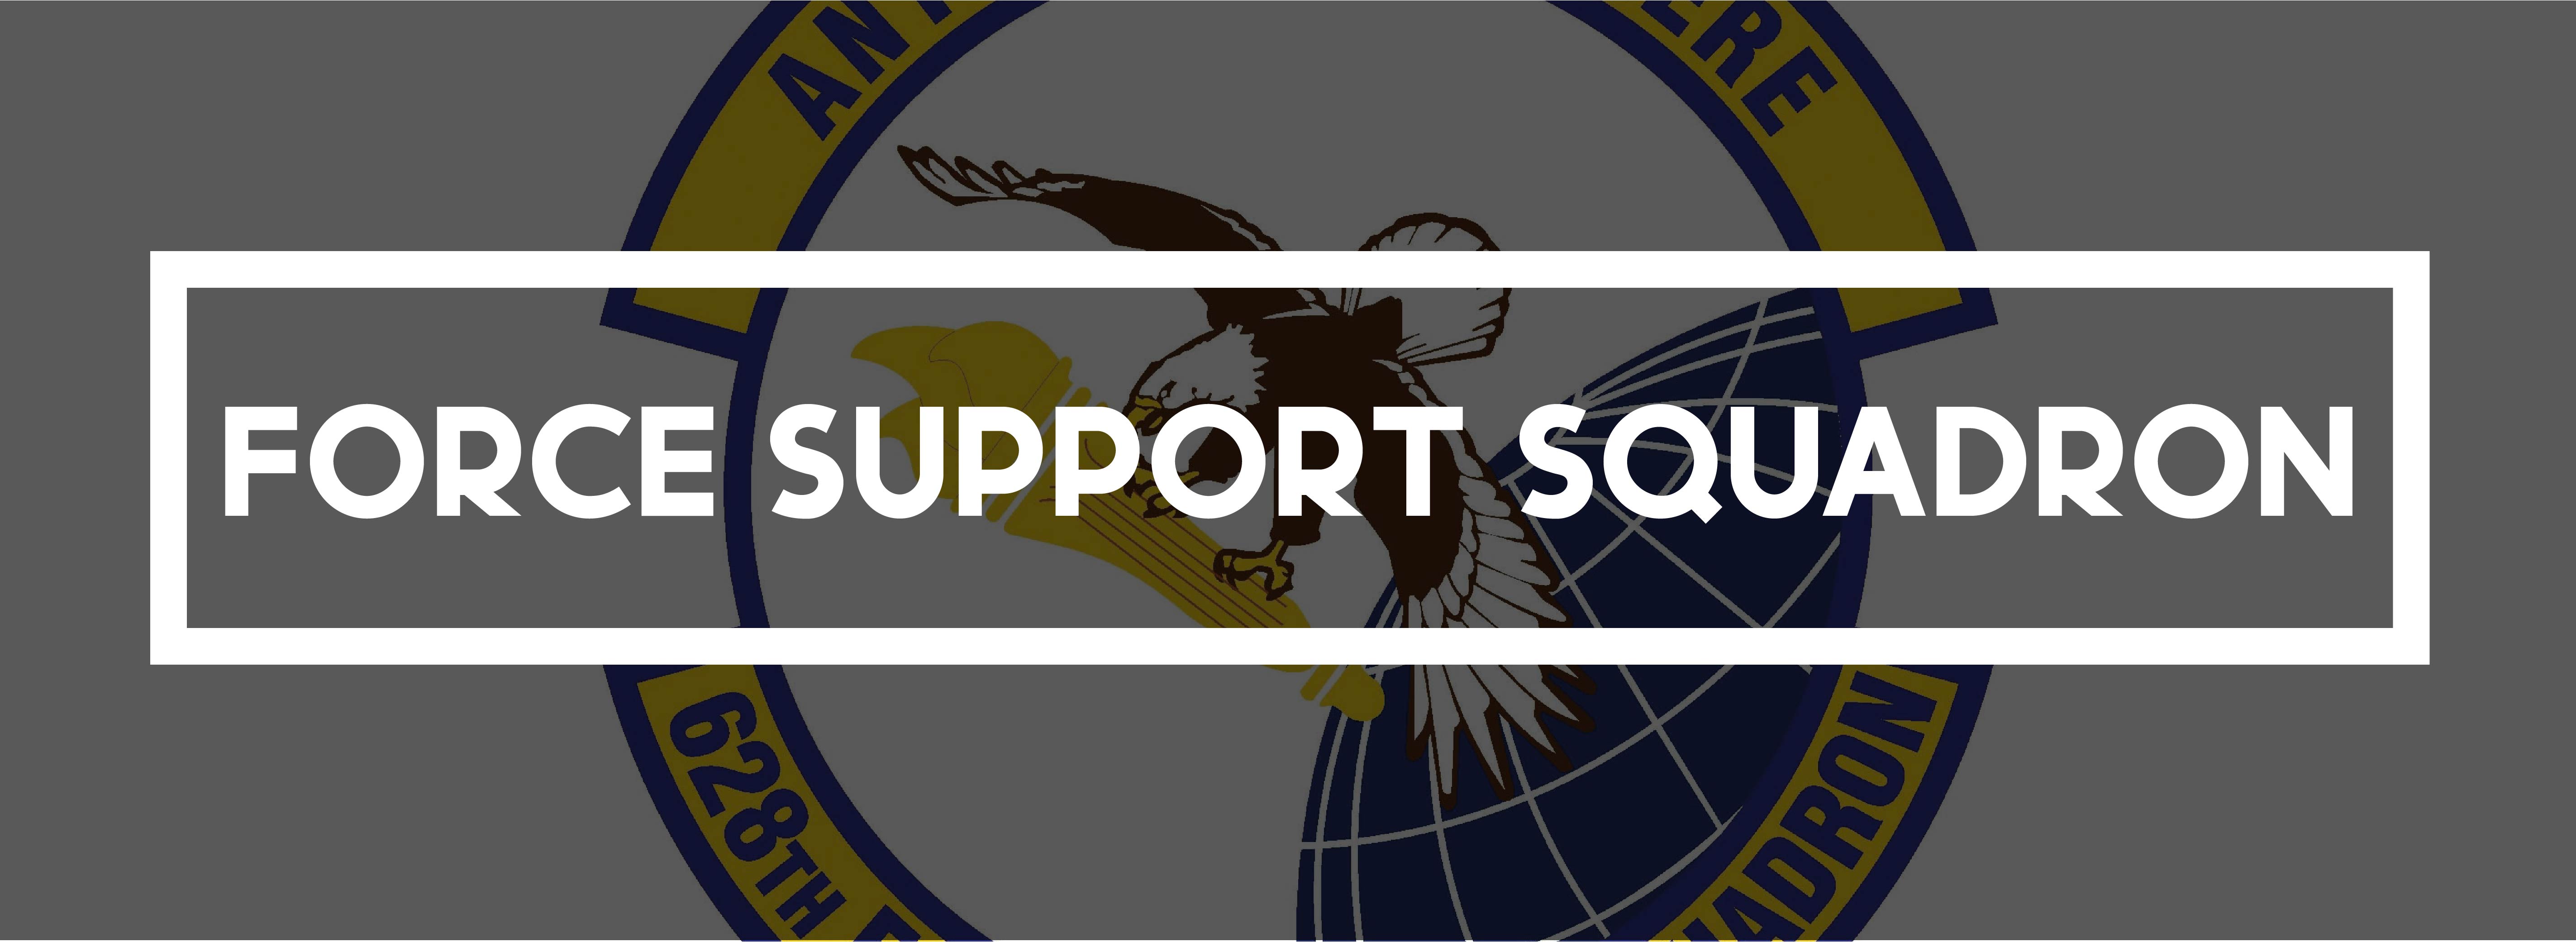 A logo for the Force Support Squadron